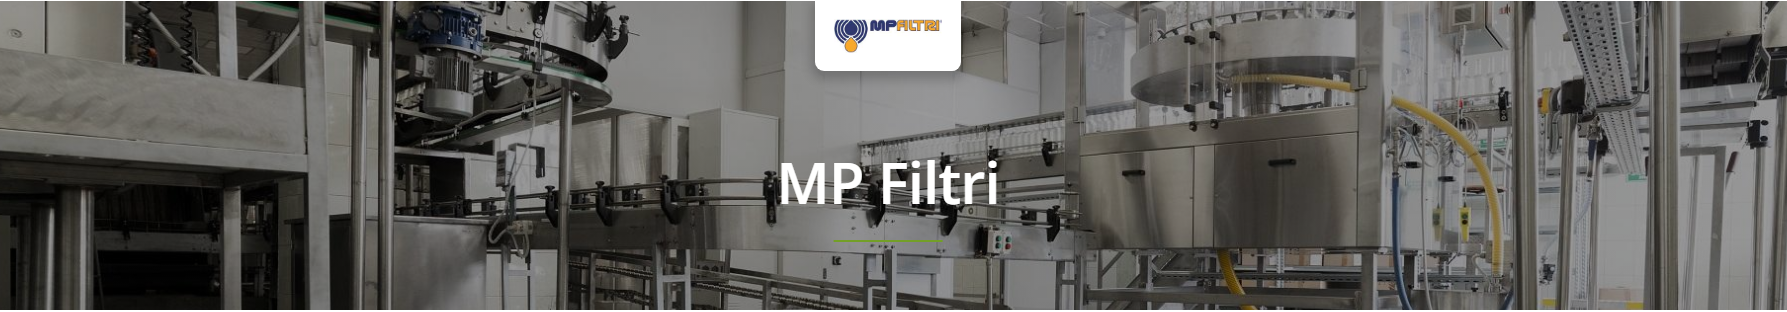 MP Filtri Particle Counters